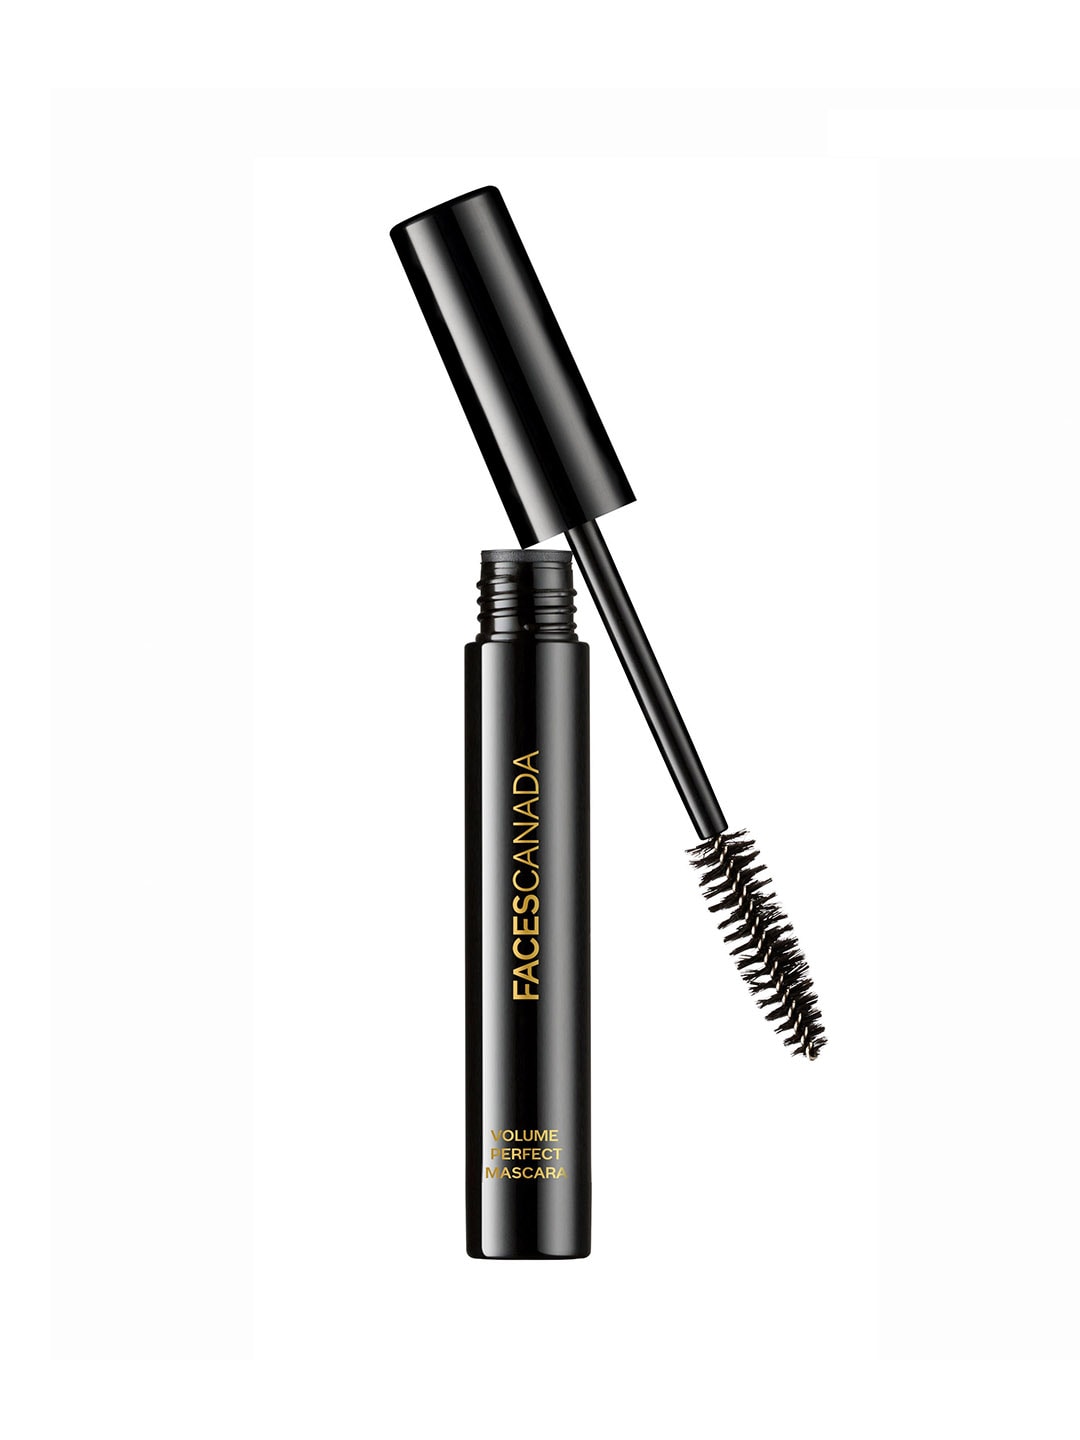 FACES CANADA Glam On Volume Perfect Mascara Price in India